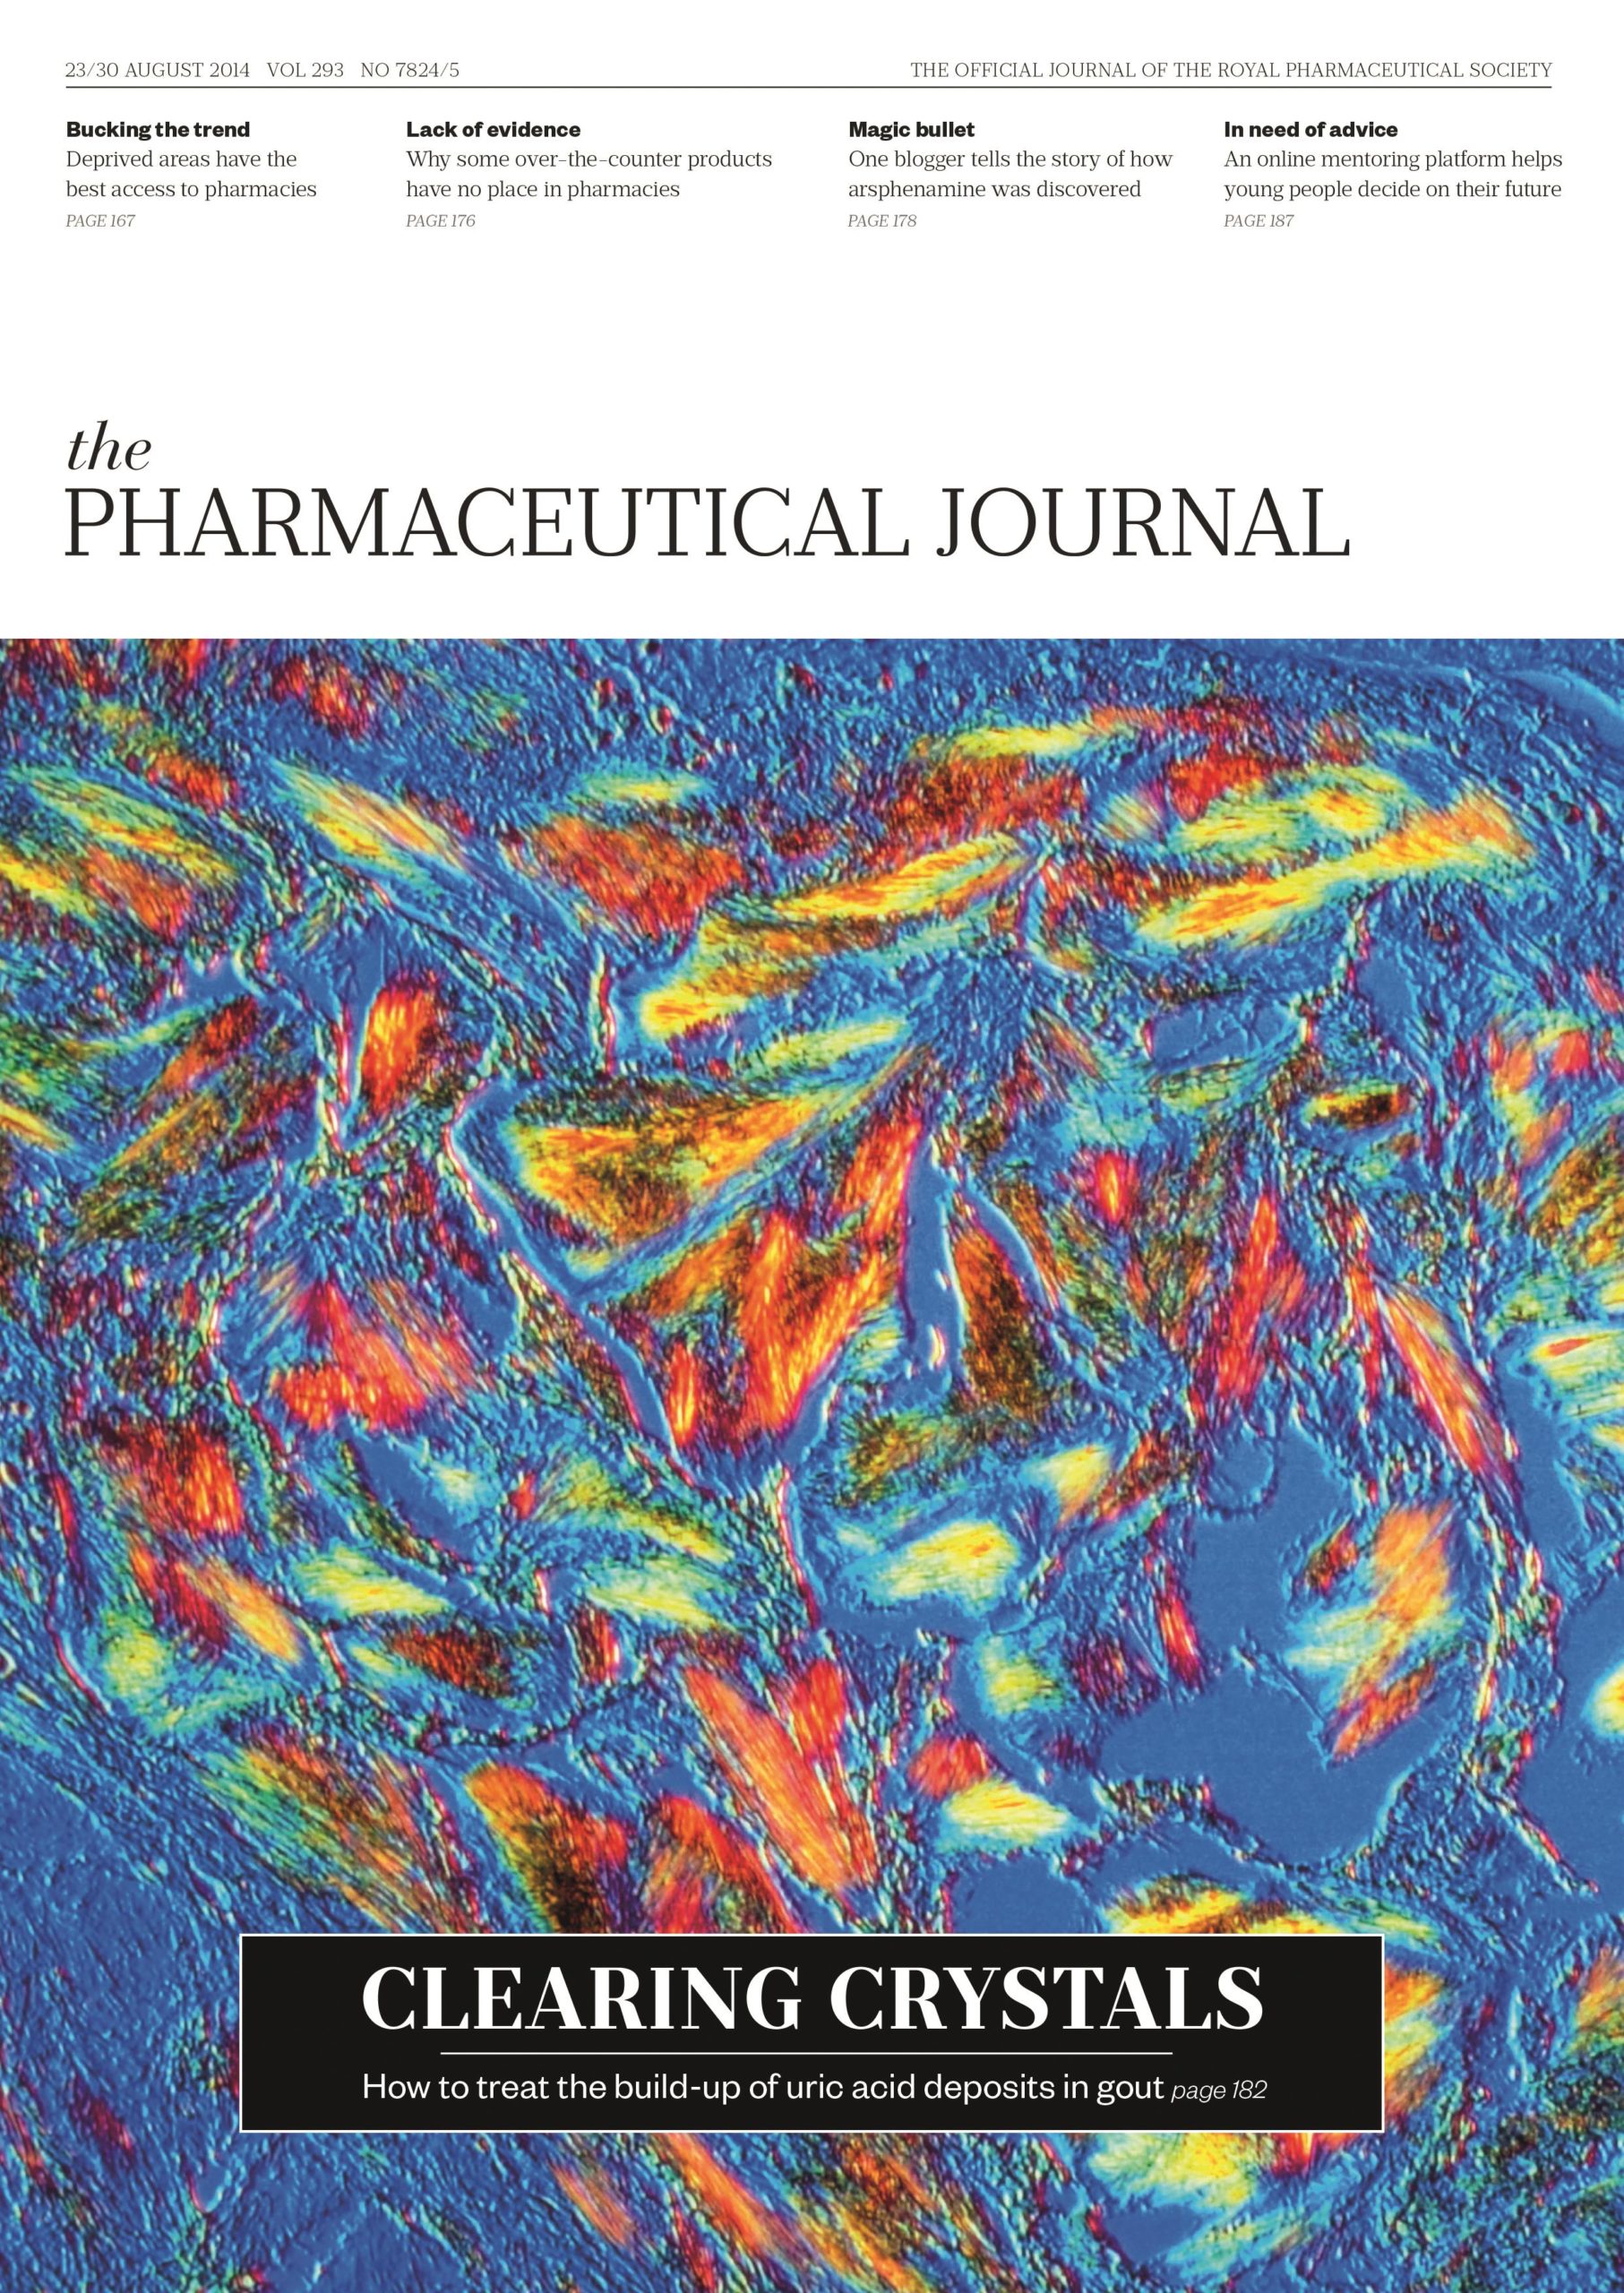 Publication issue cover for PJ, 23/30 August 2014, Vol 293, No 7824/5